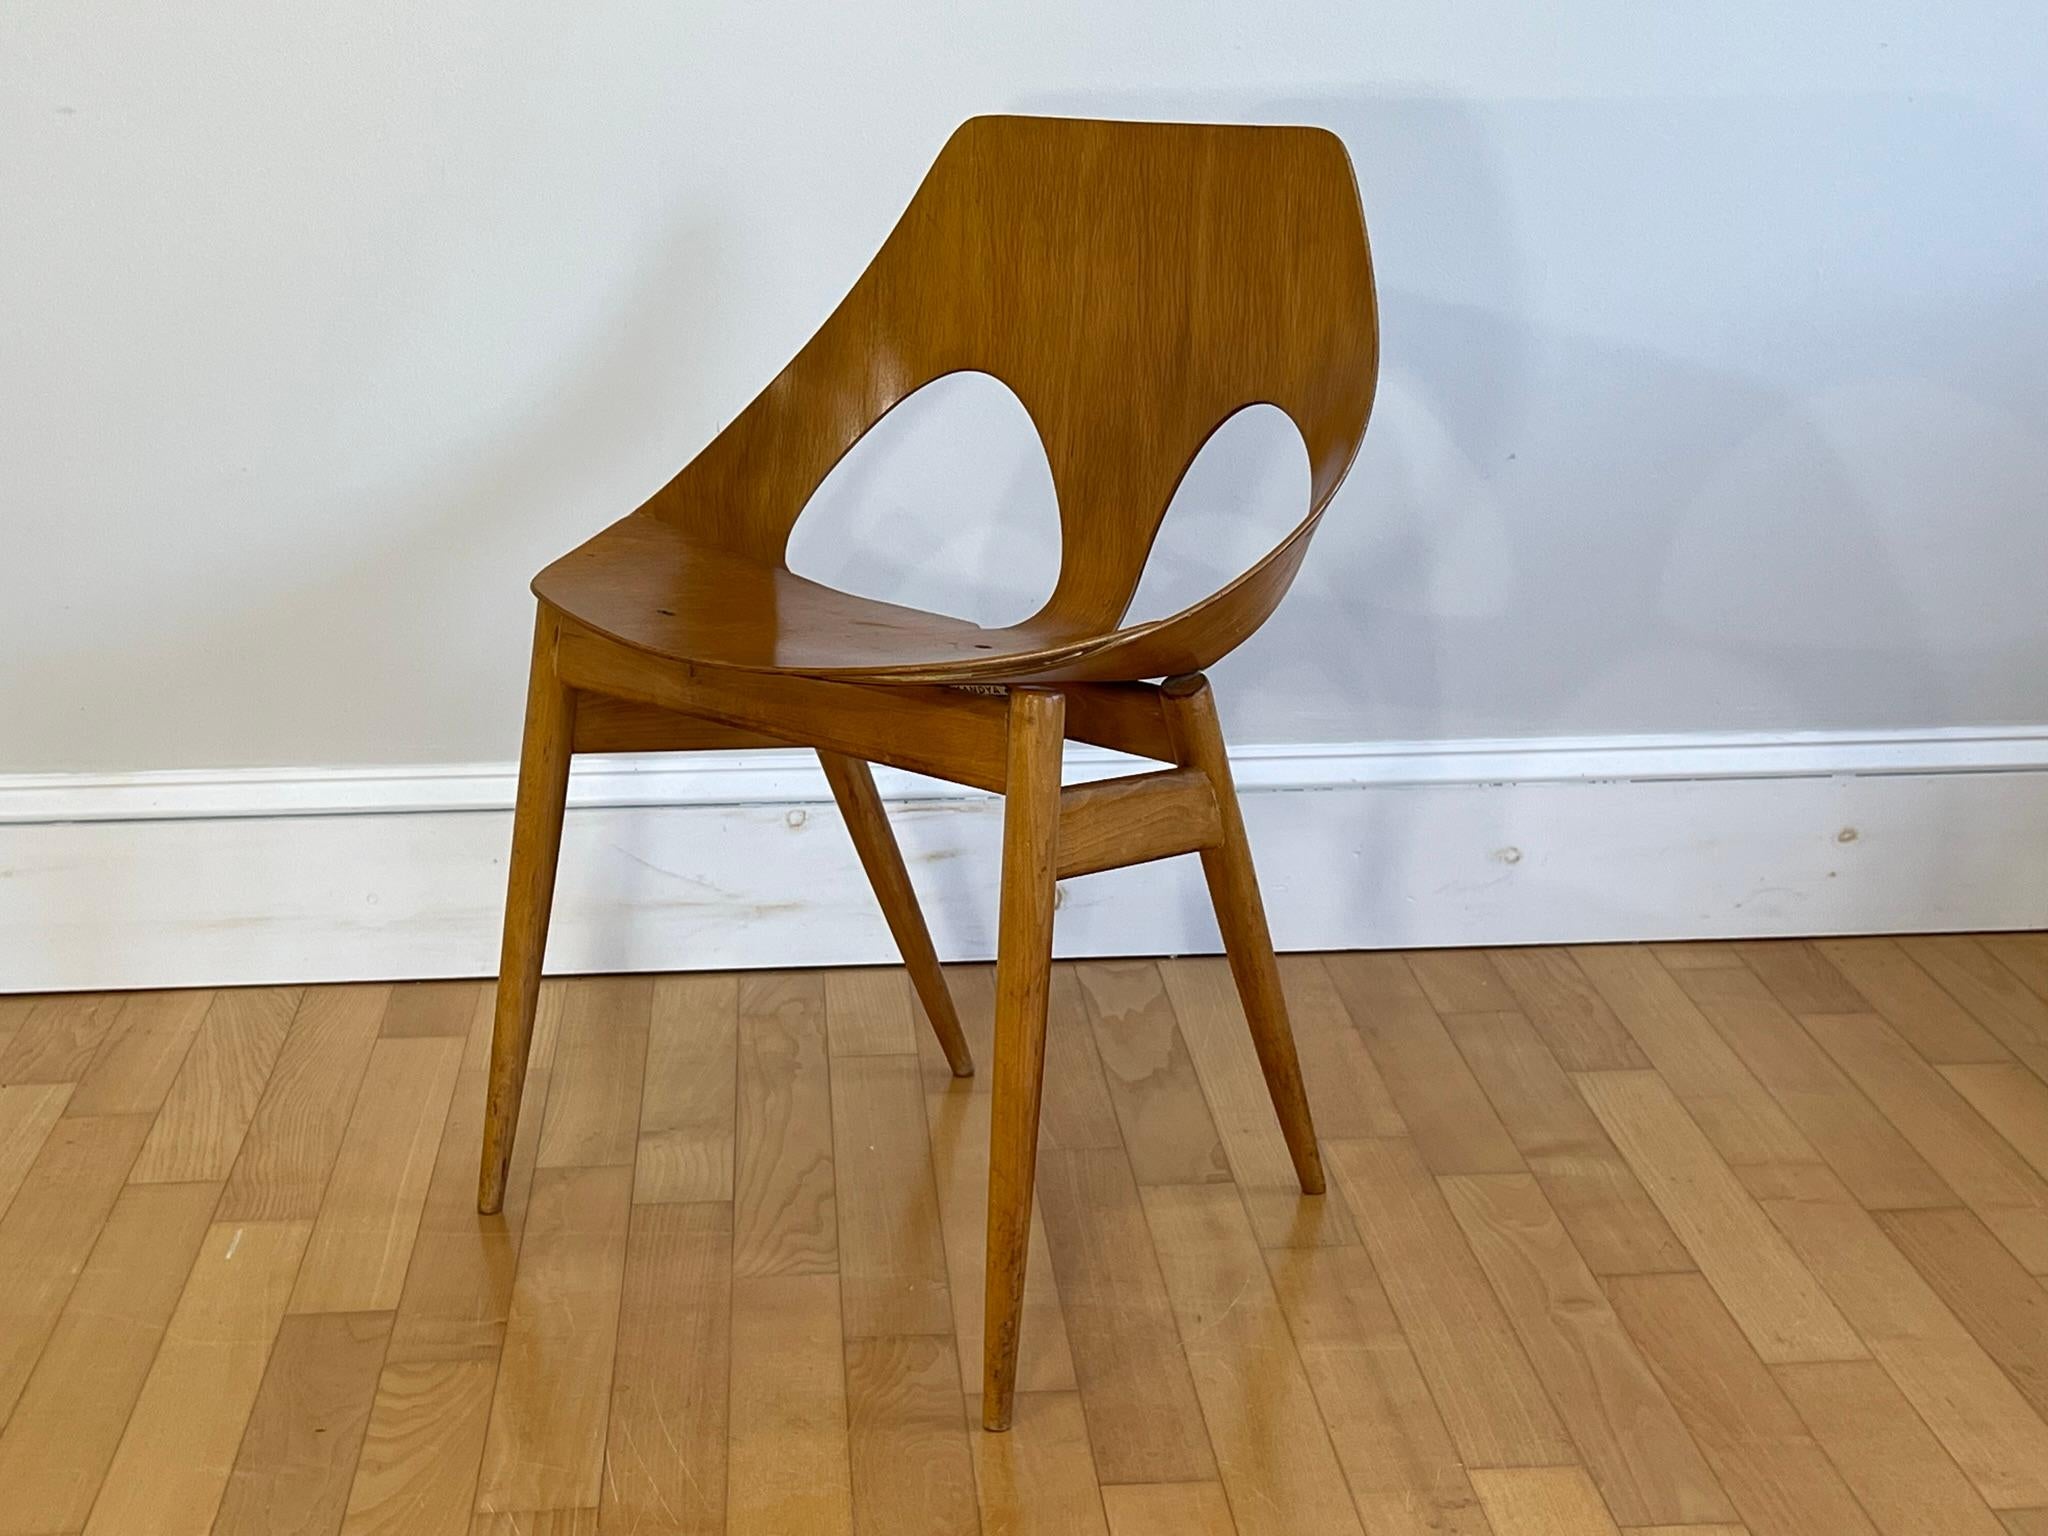 Later, Frank Guille replaced the Jason chair’s wooden legs with a steel-rod base and introduced painted or part-painted seat options, introducing greater color choice and individuality into the range.